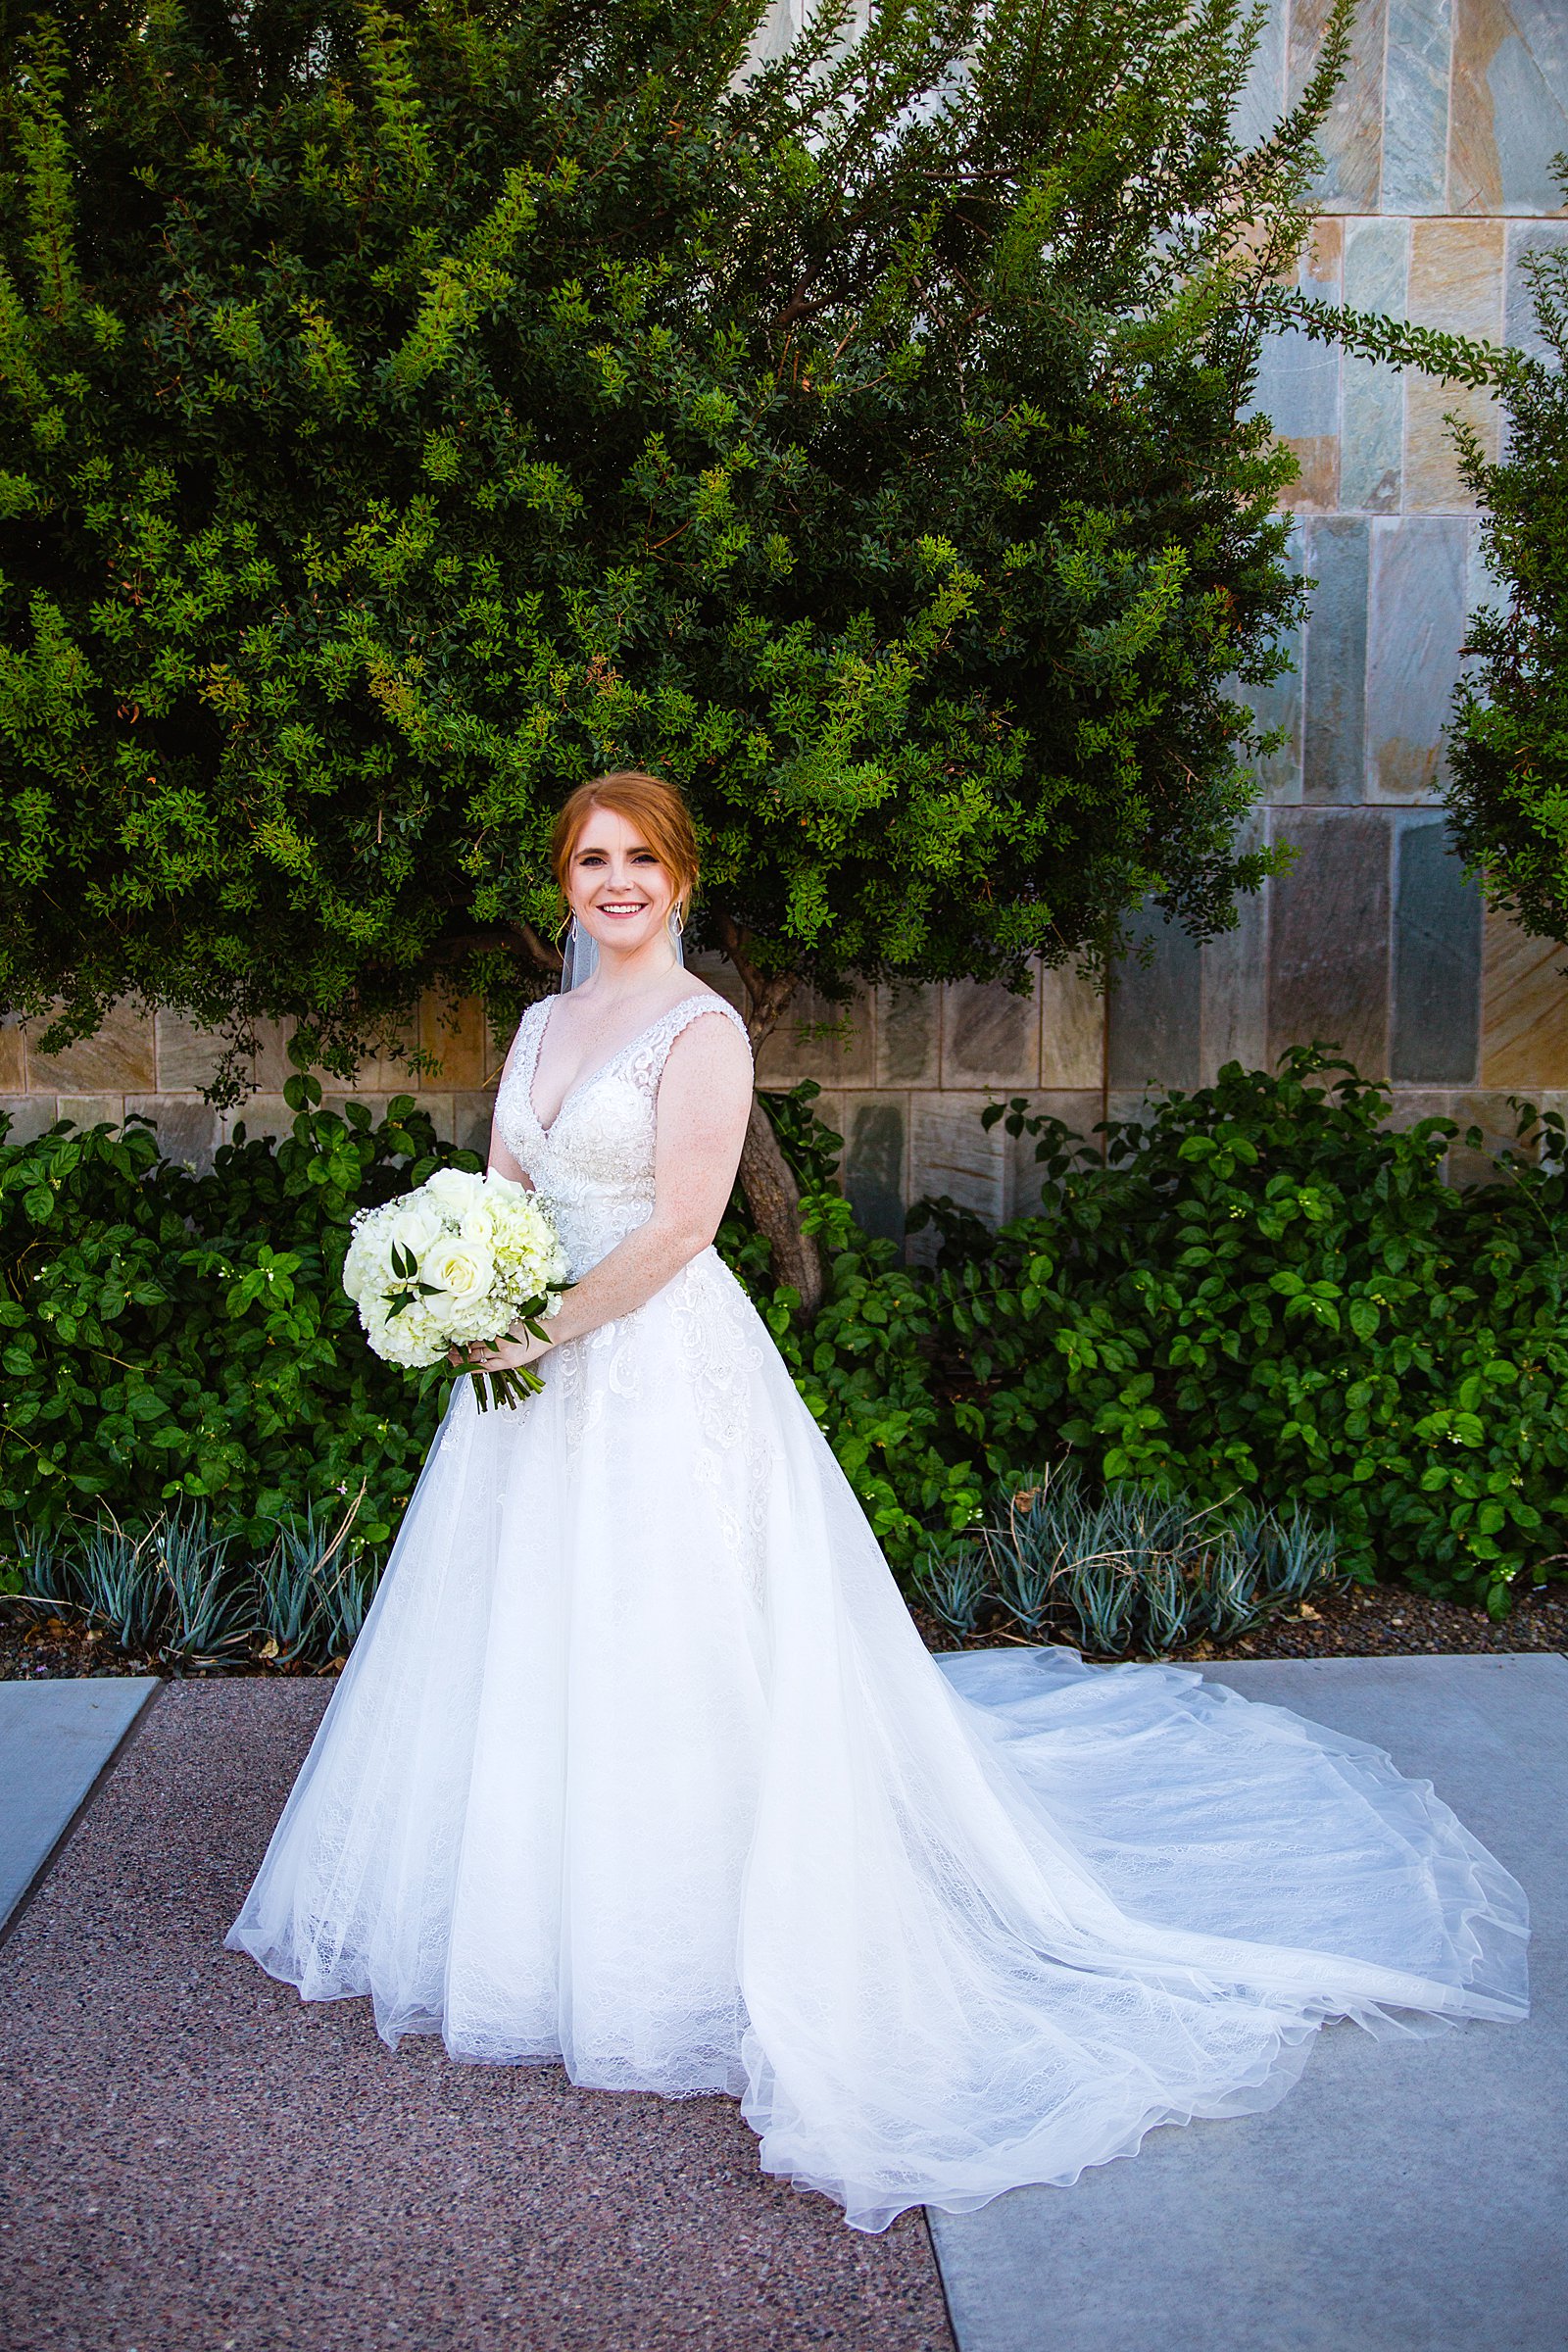 Bride's modern and romantic wedding dress for her SoHo63 wedding by PMA Photography.